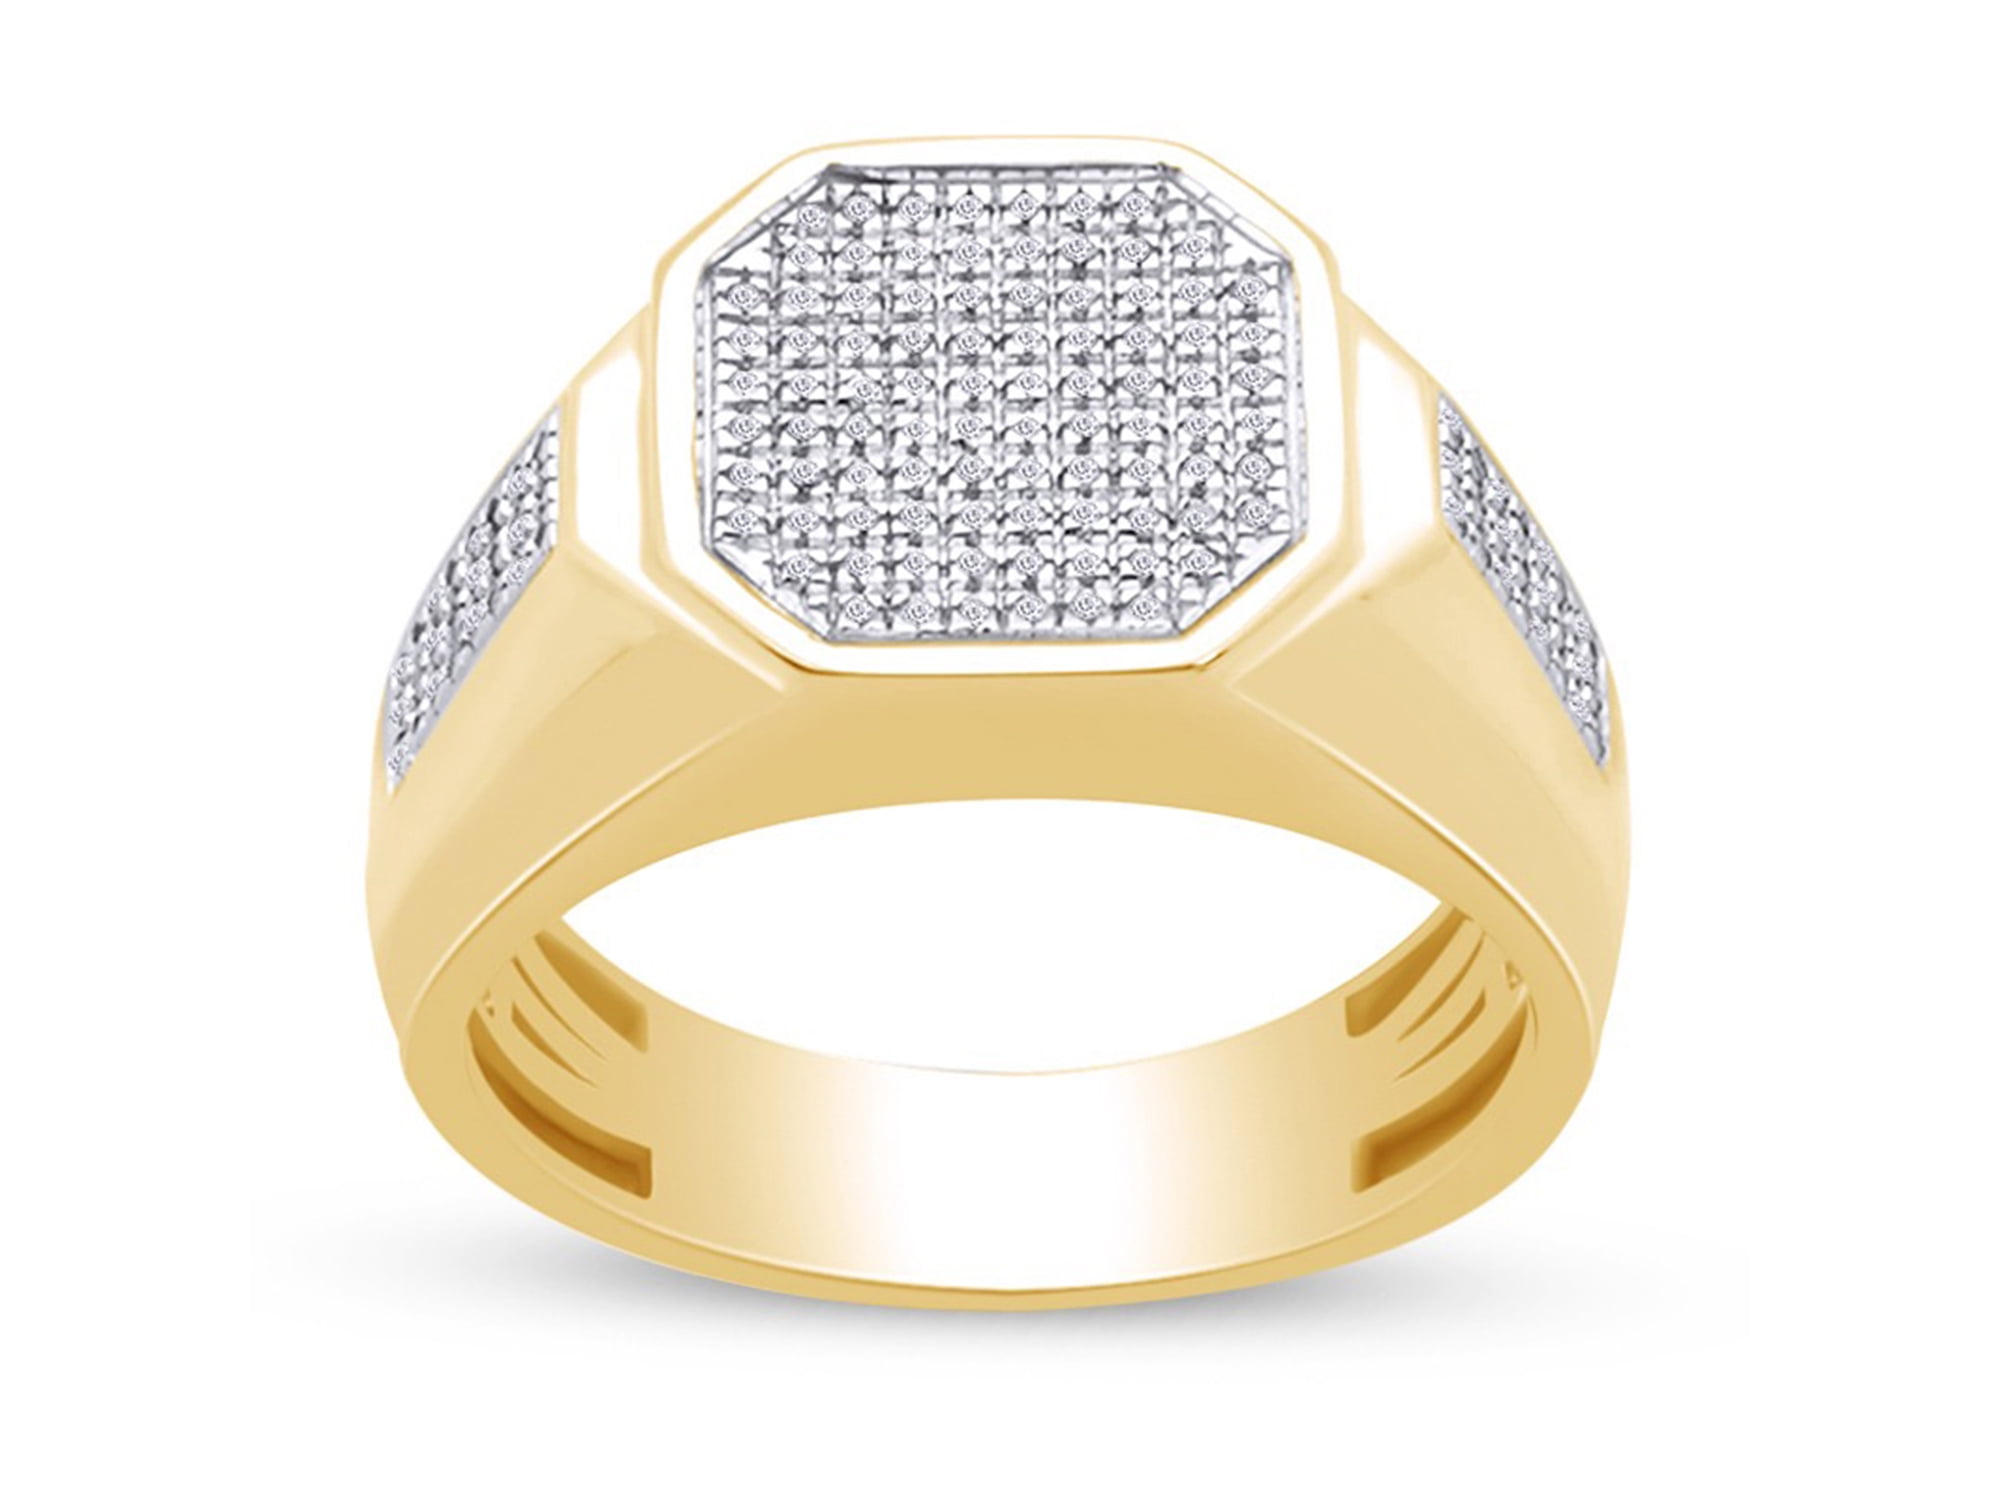 Wishrocks Round Cut Cubic Zirconia Hip Hop Mens Hand Band Ring in 14K Gold Over Sterling Silver